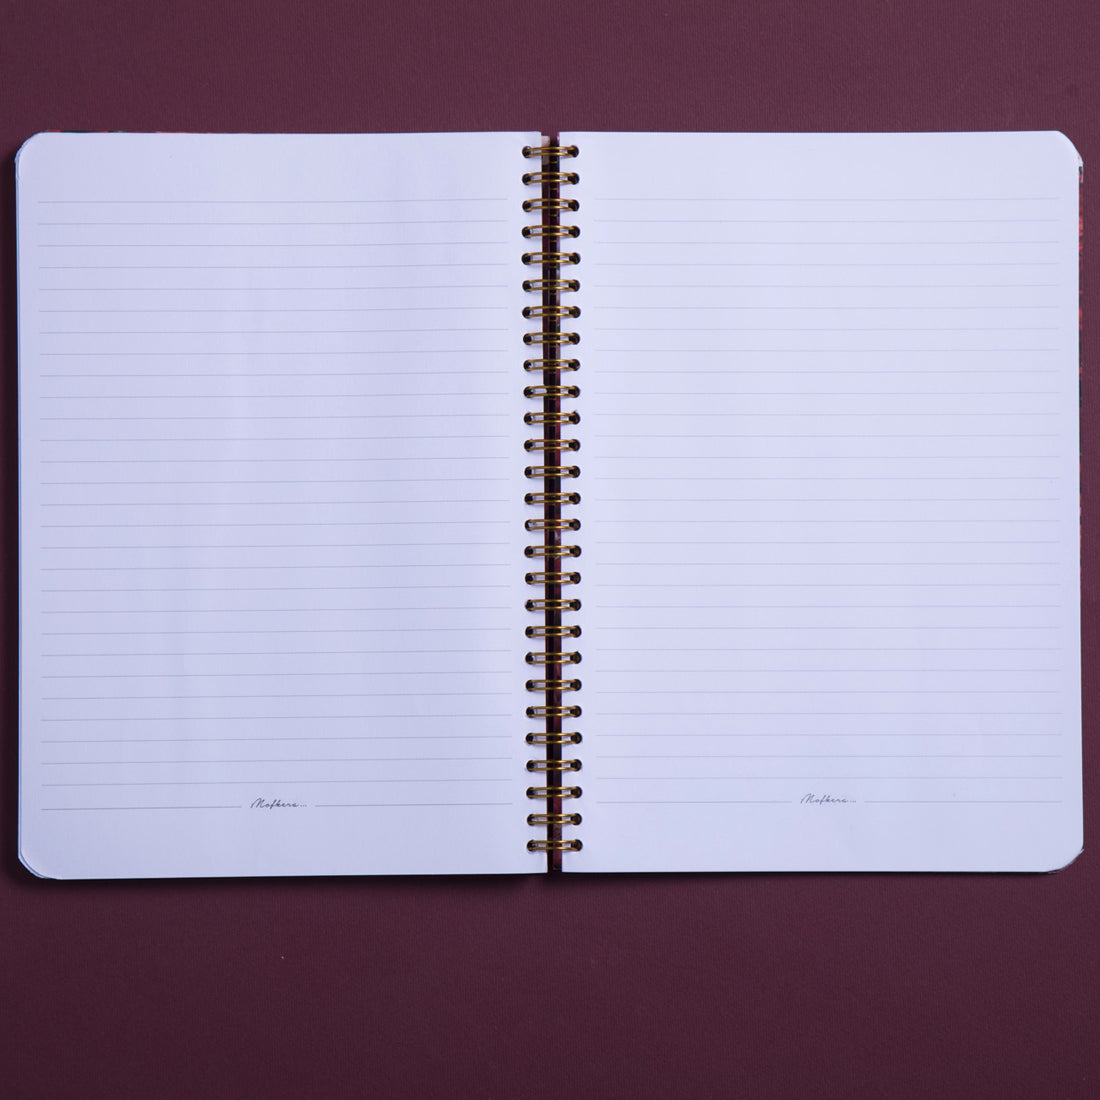 Crazy Notebook- A4 Size (Wire)